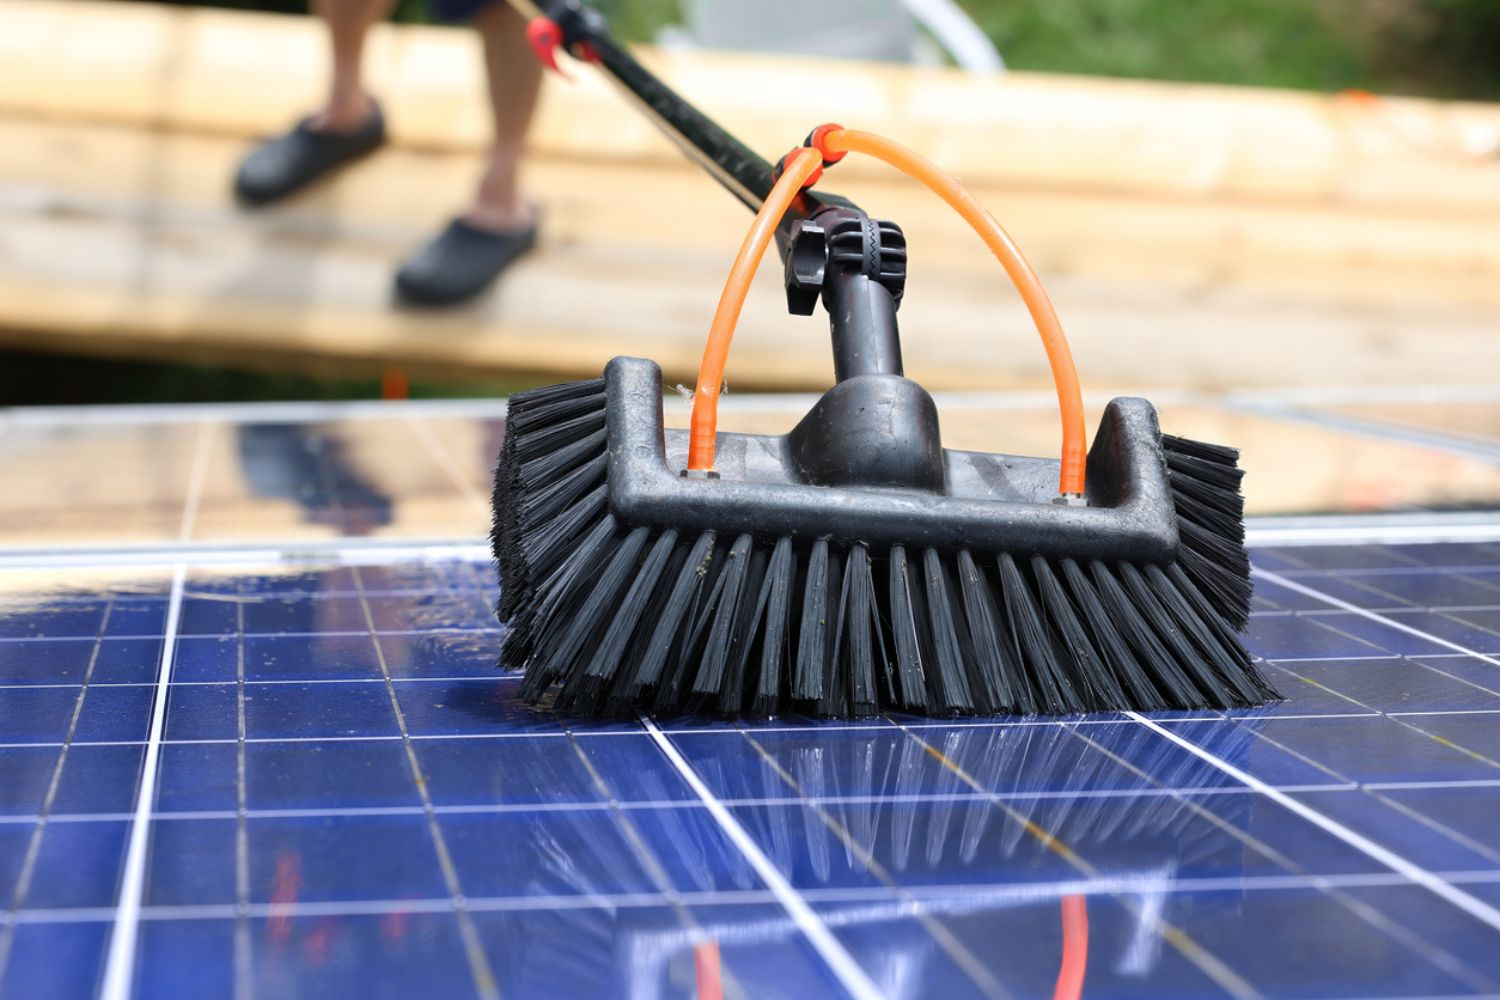 How Much Does Solar Panel Cleaning Cost?